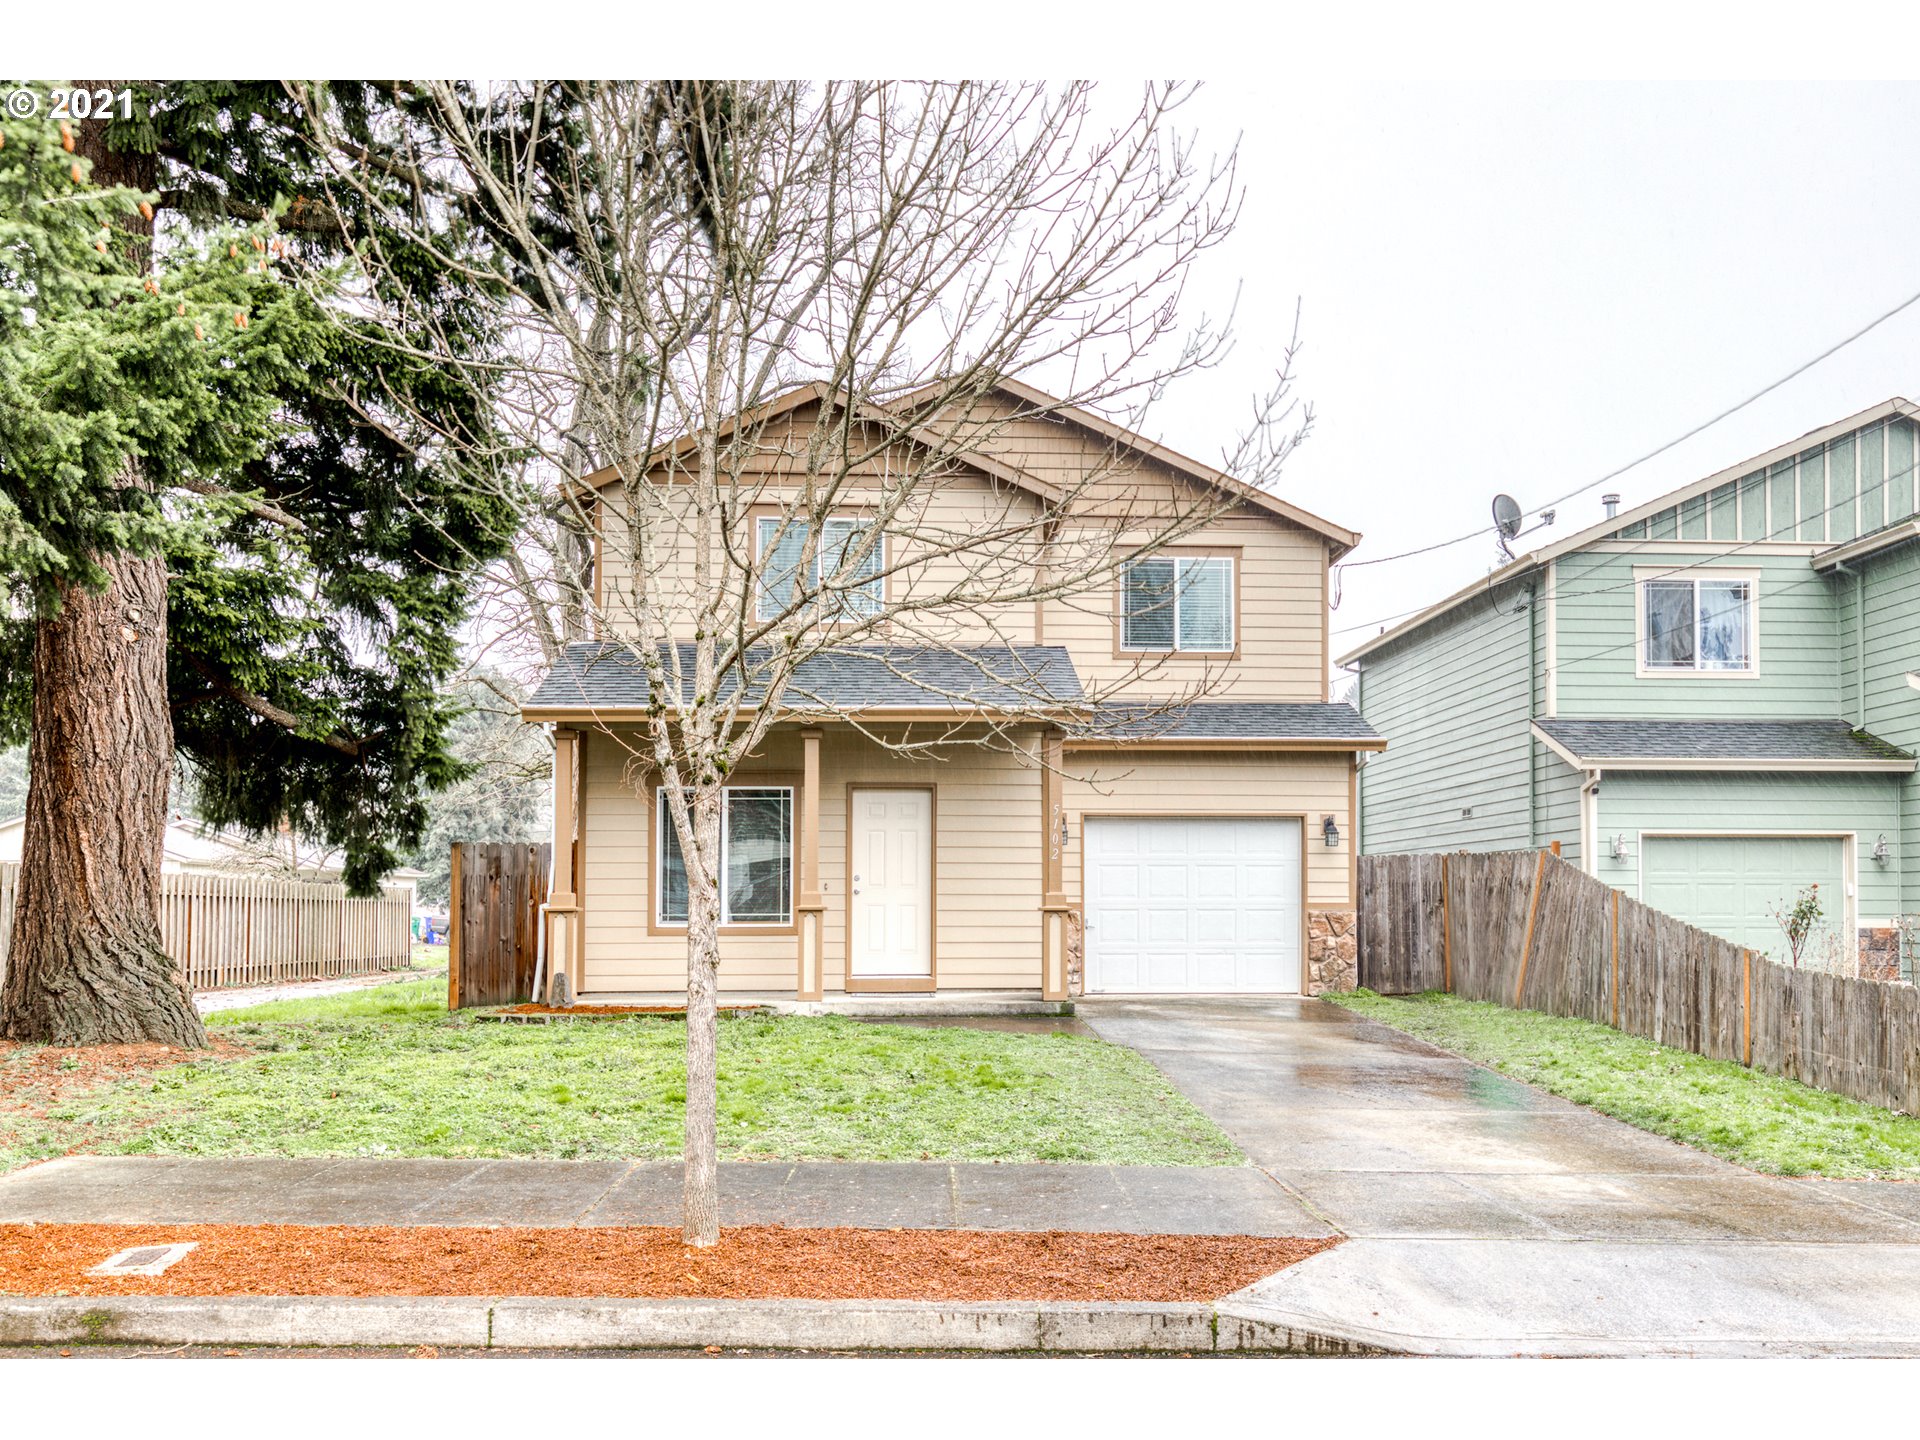 5102 SE 113TH AVE (1 of 25)